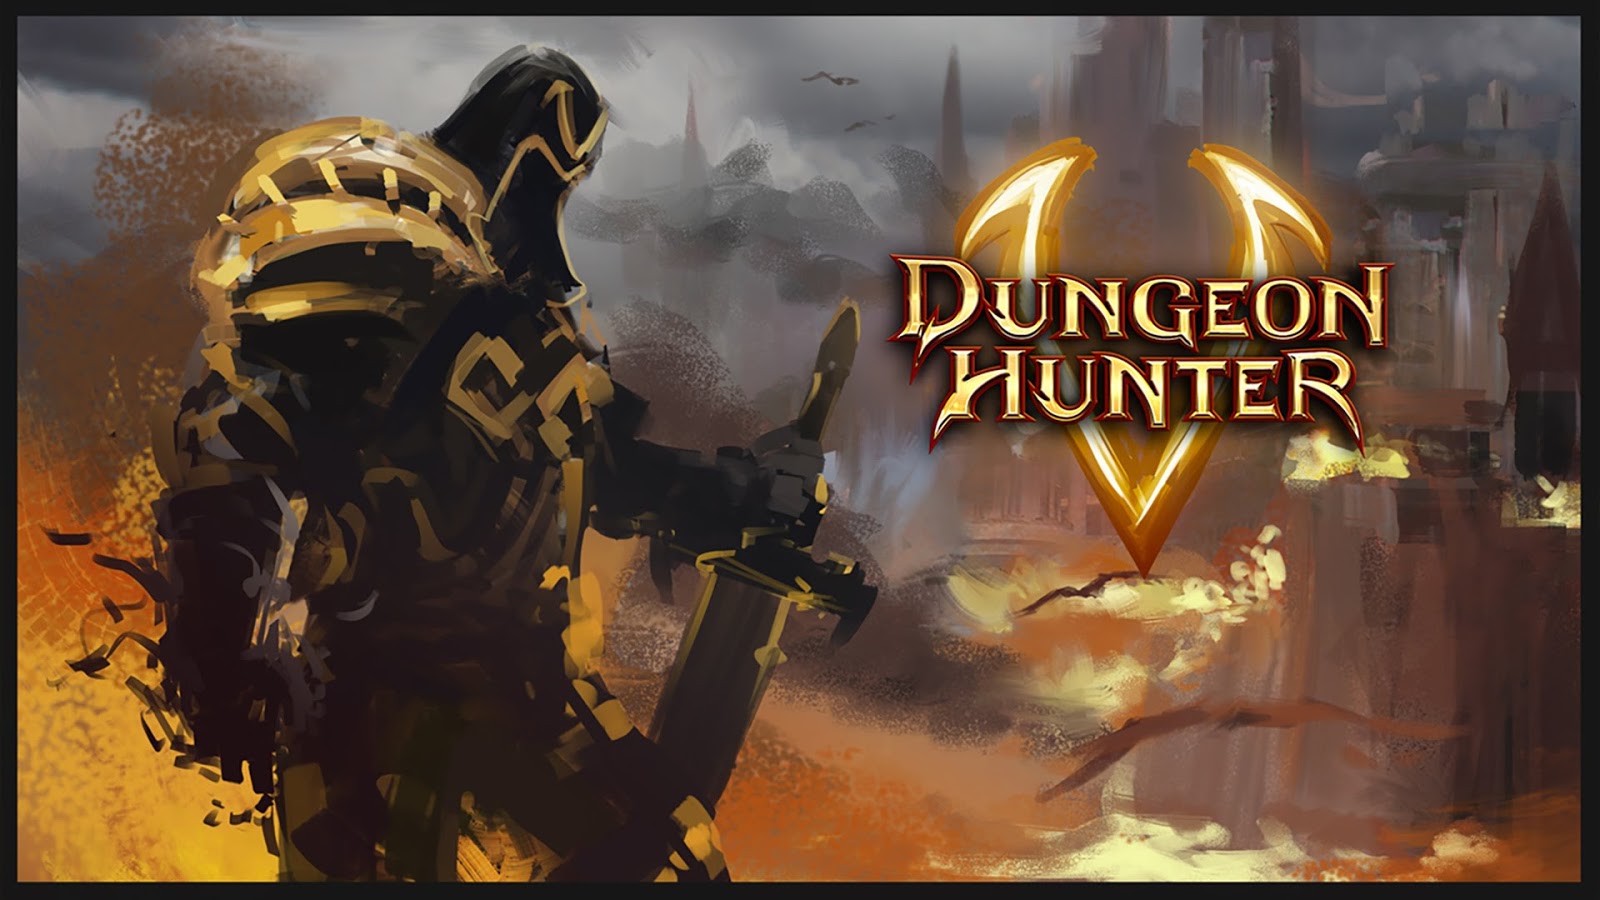 Dungeon hunter 5 download for android